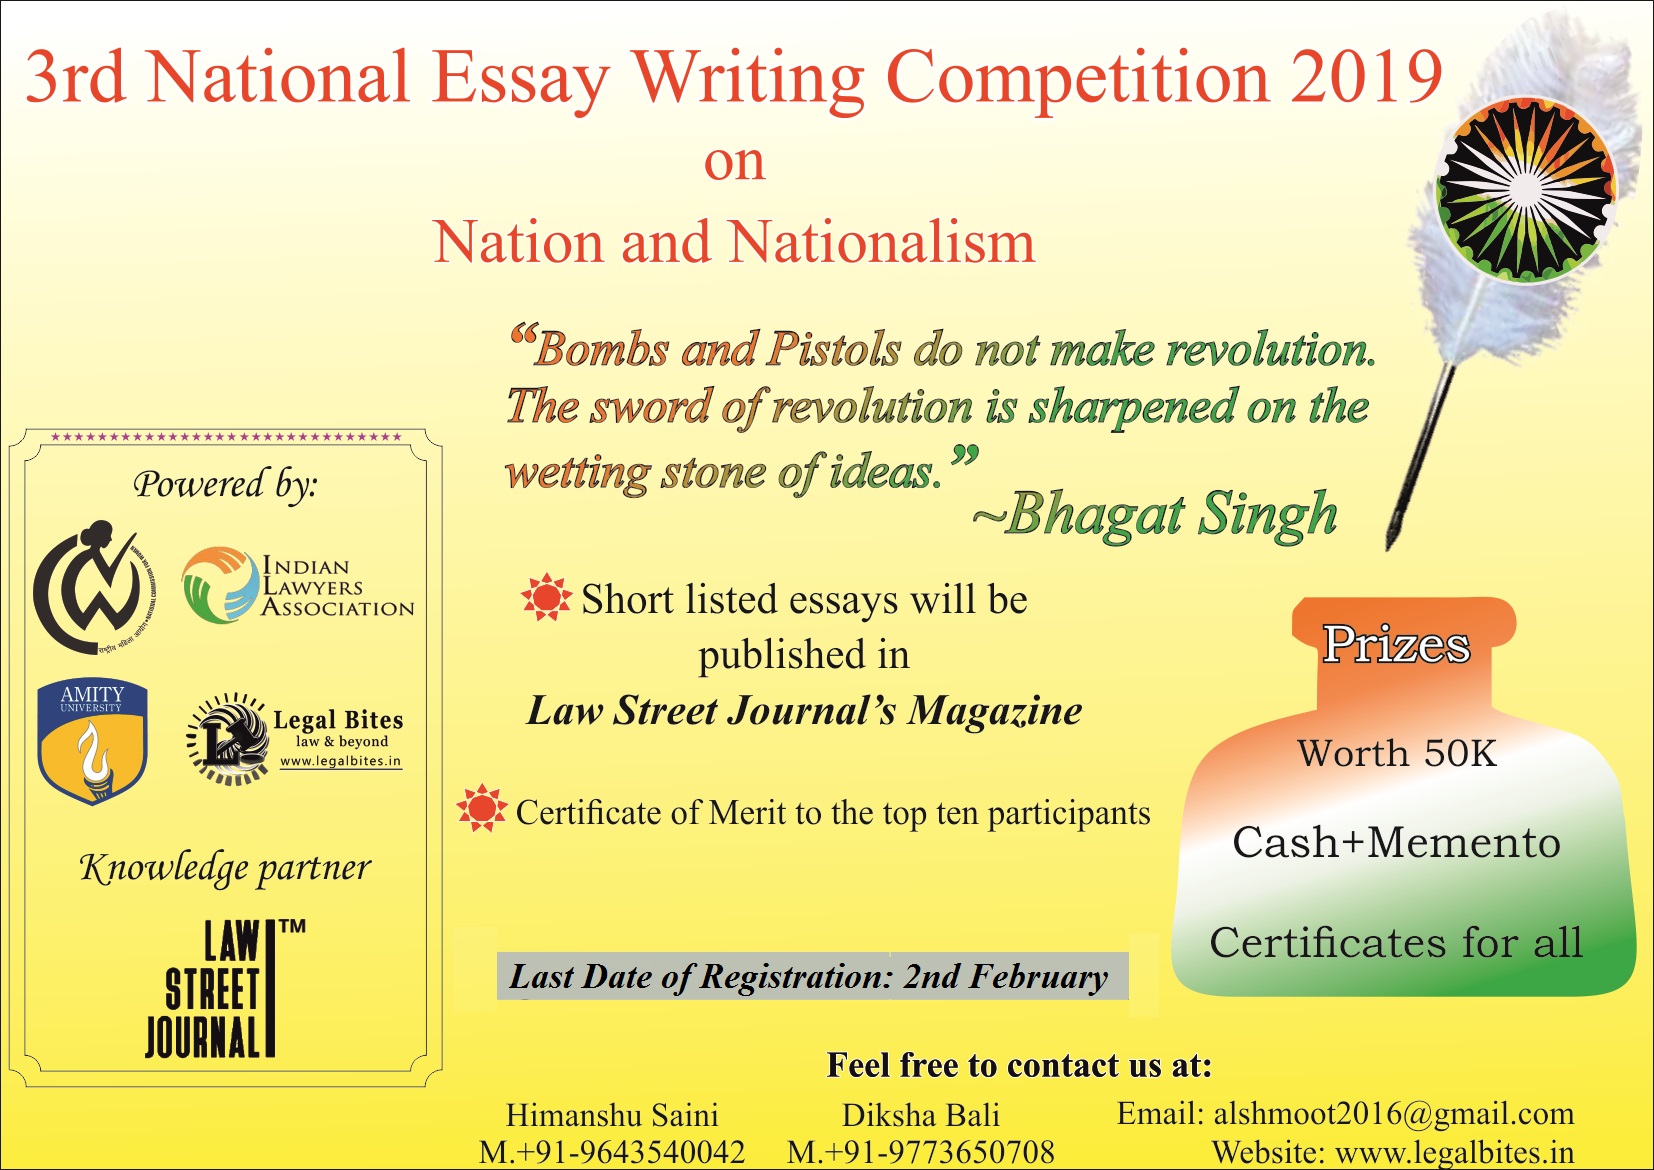 3rd National Essay Writing Competition on Nation and Nationalism 2019